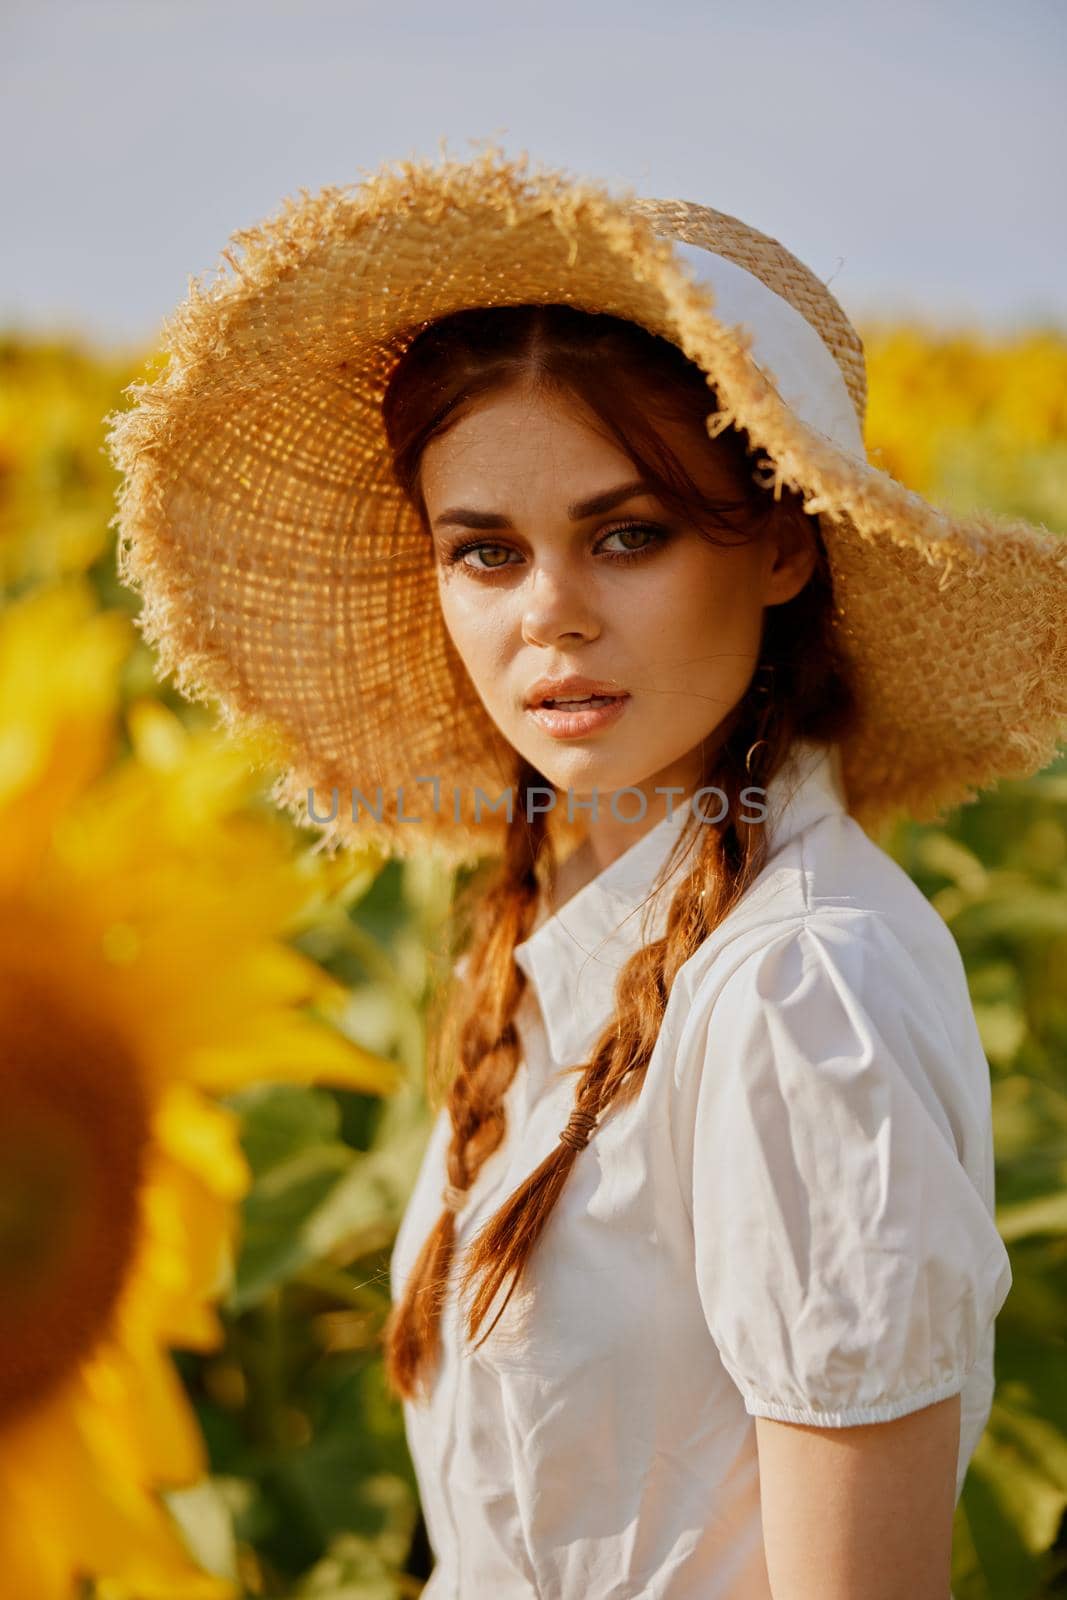 woman with pigtails in a field of sunflowers lifestyle landscape. High quality photo